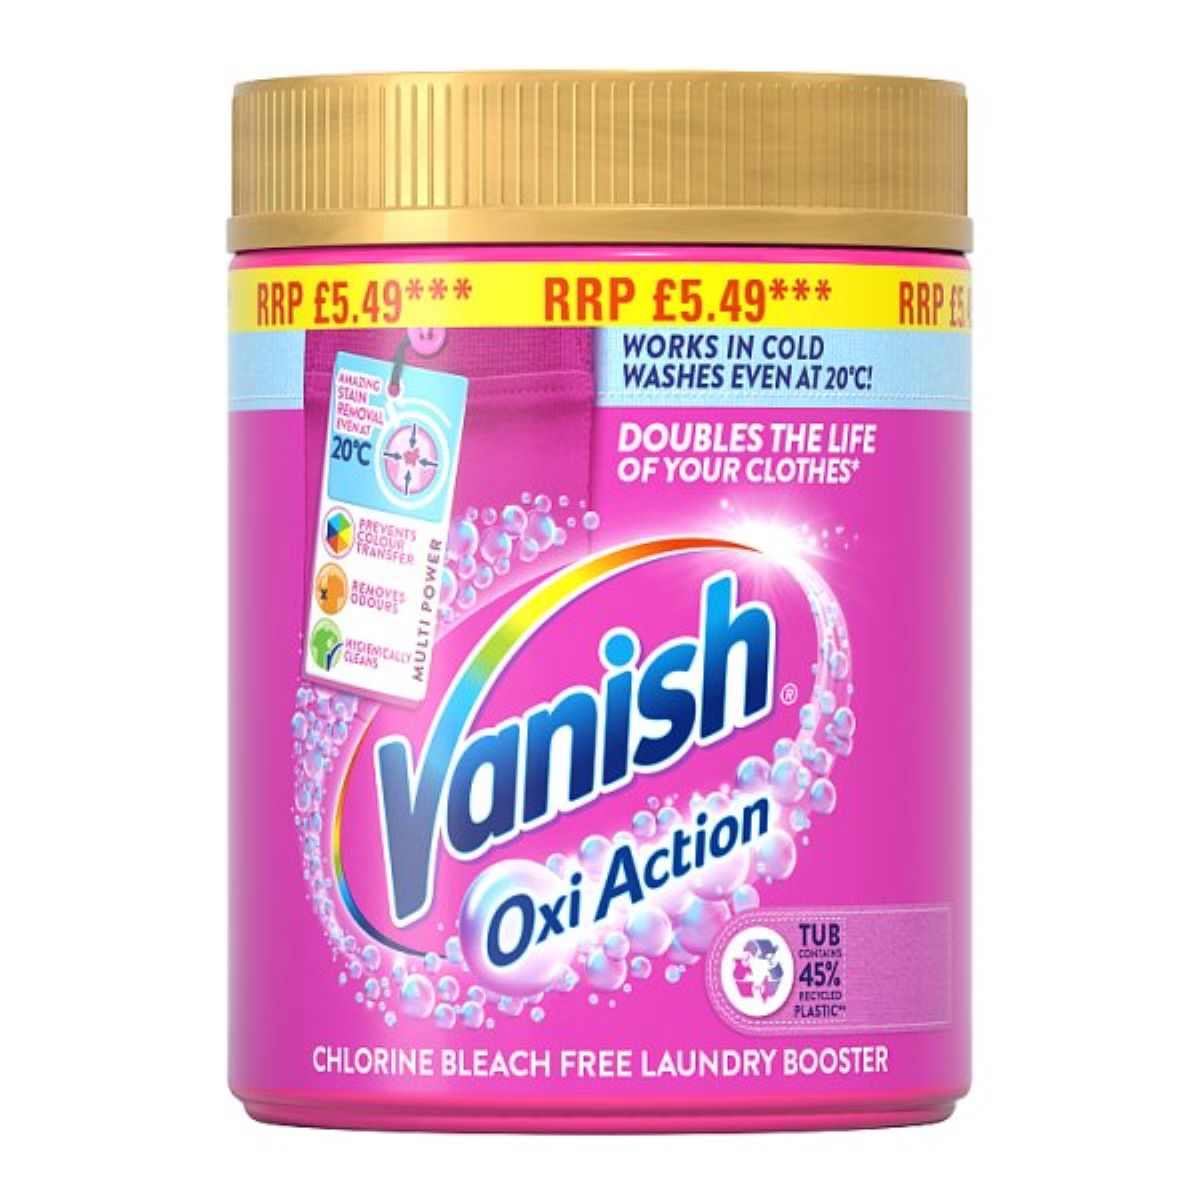 Vanish Oxi Action Fabric Stain Remover Powder Colours PM£5.49 470g